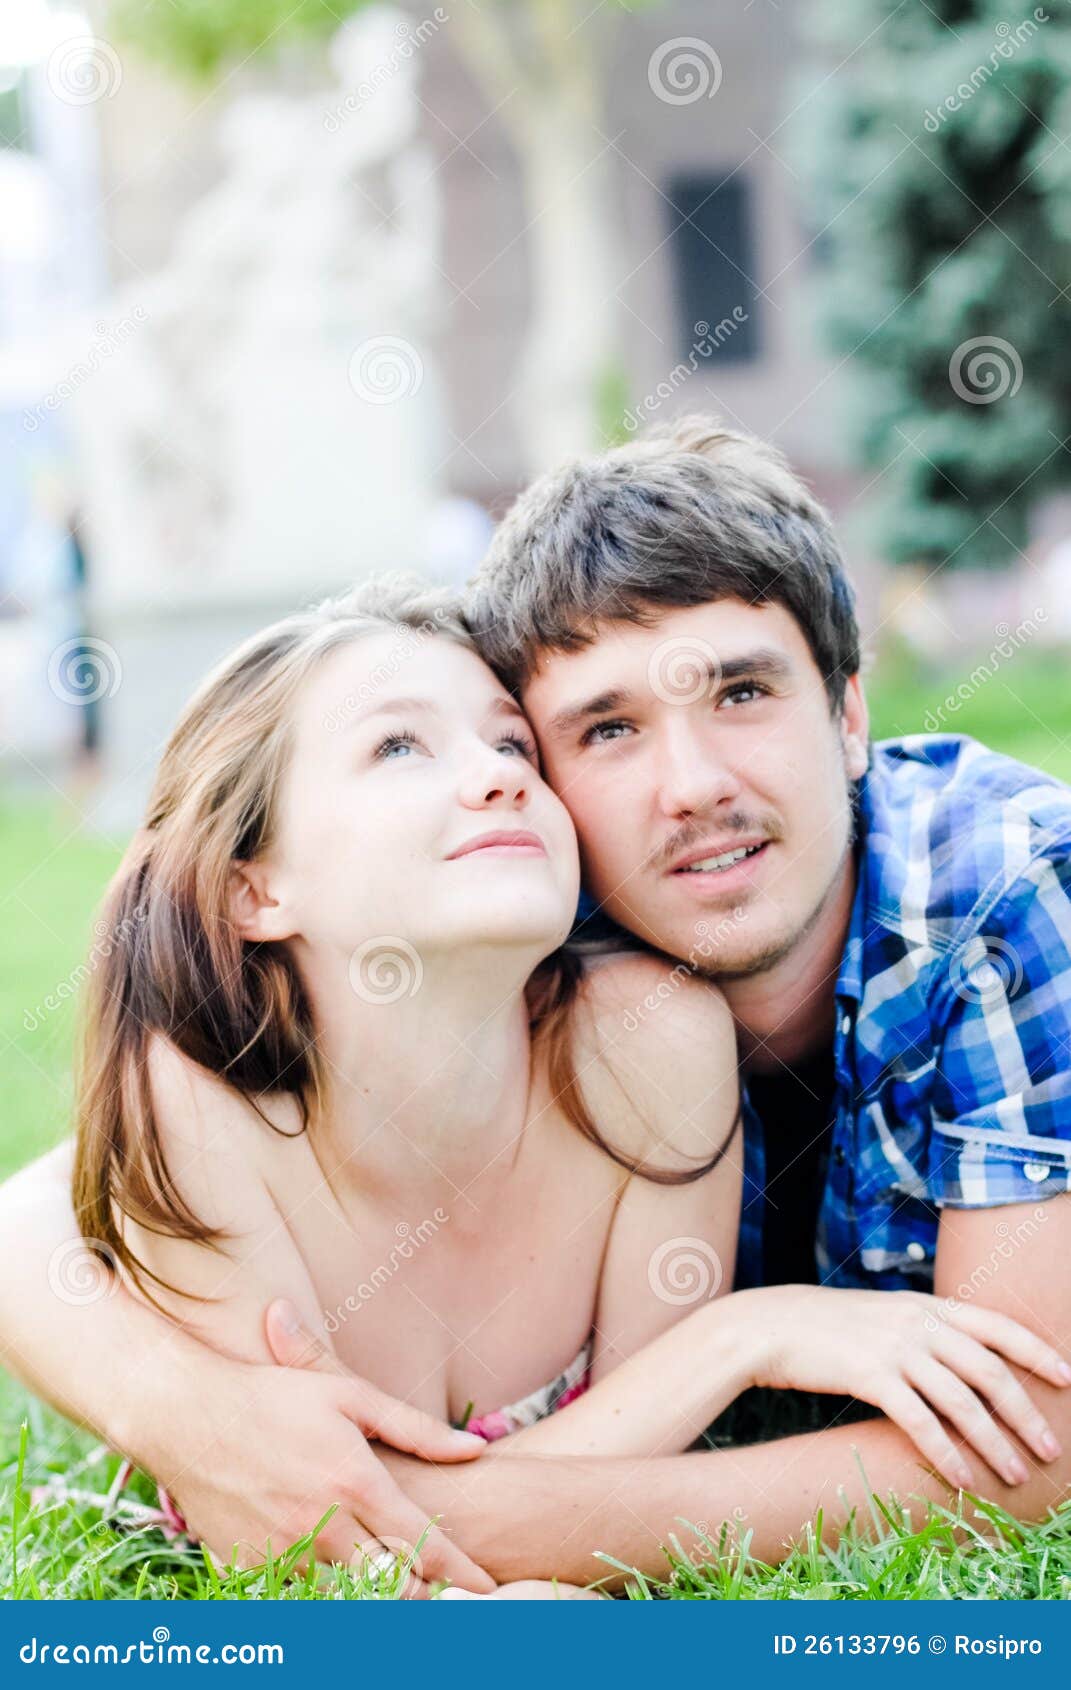 Romantic Couple In Love Embracing Lying Outdoors Royalty Free Stock